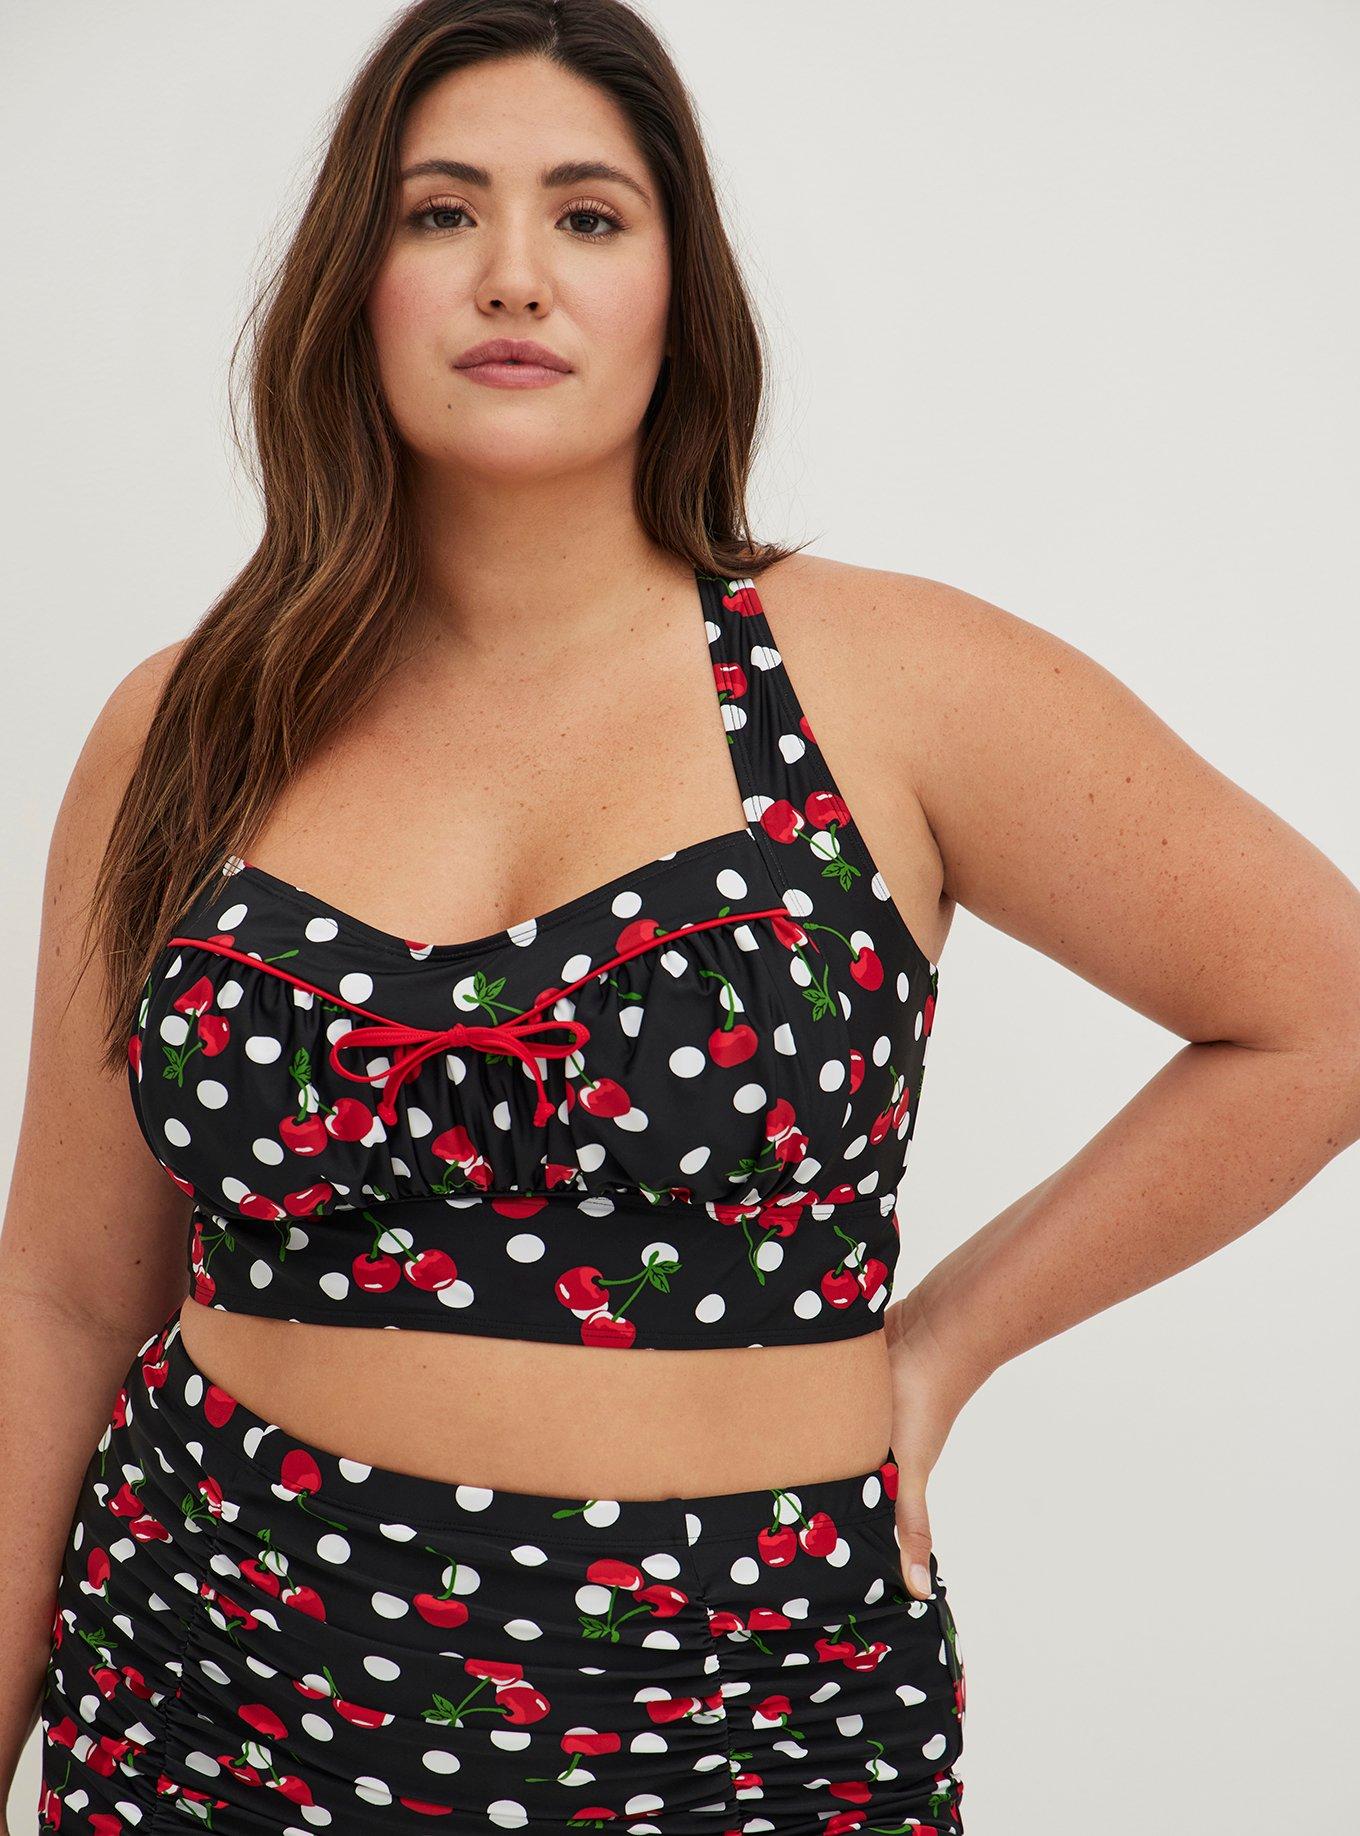 White And Red Polka Dot Leggings Sexy Vintage Spot Print Push Up